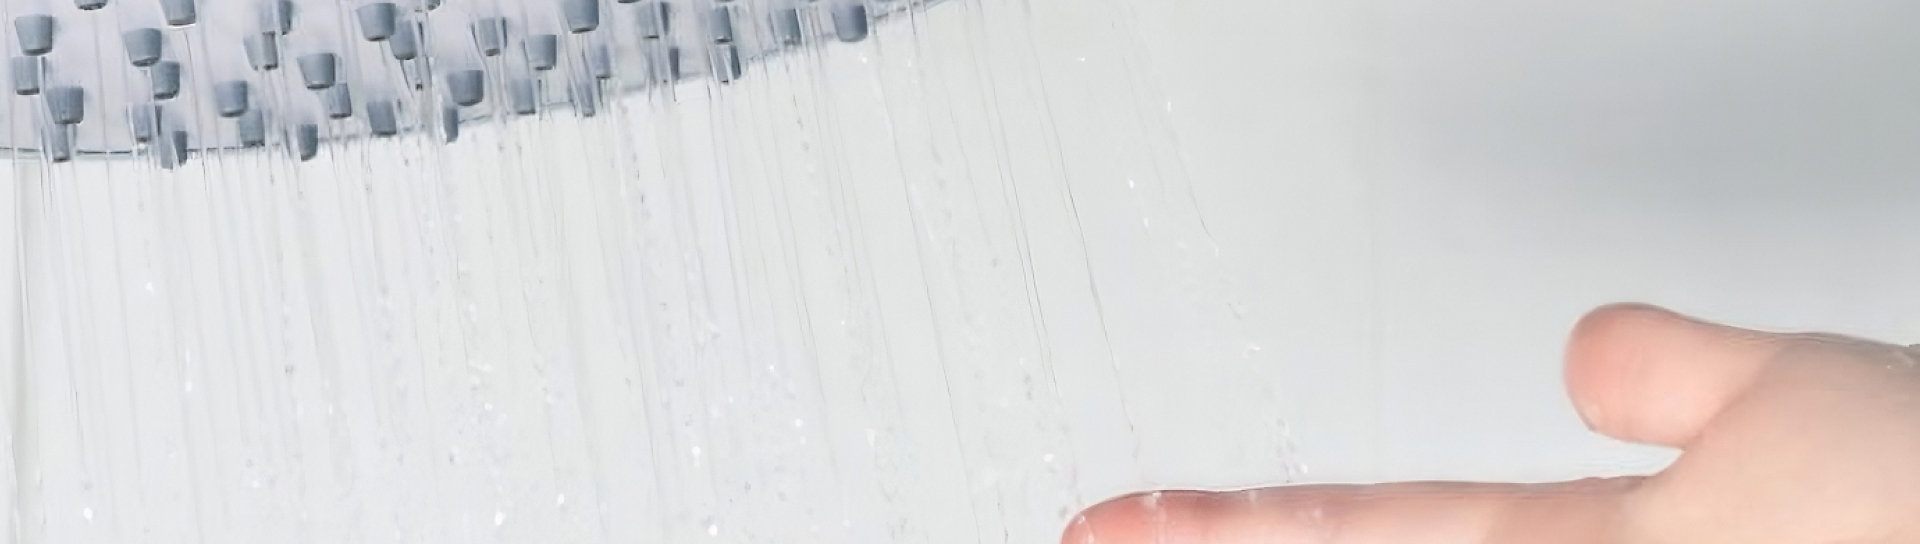 A person's hand under a shower head